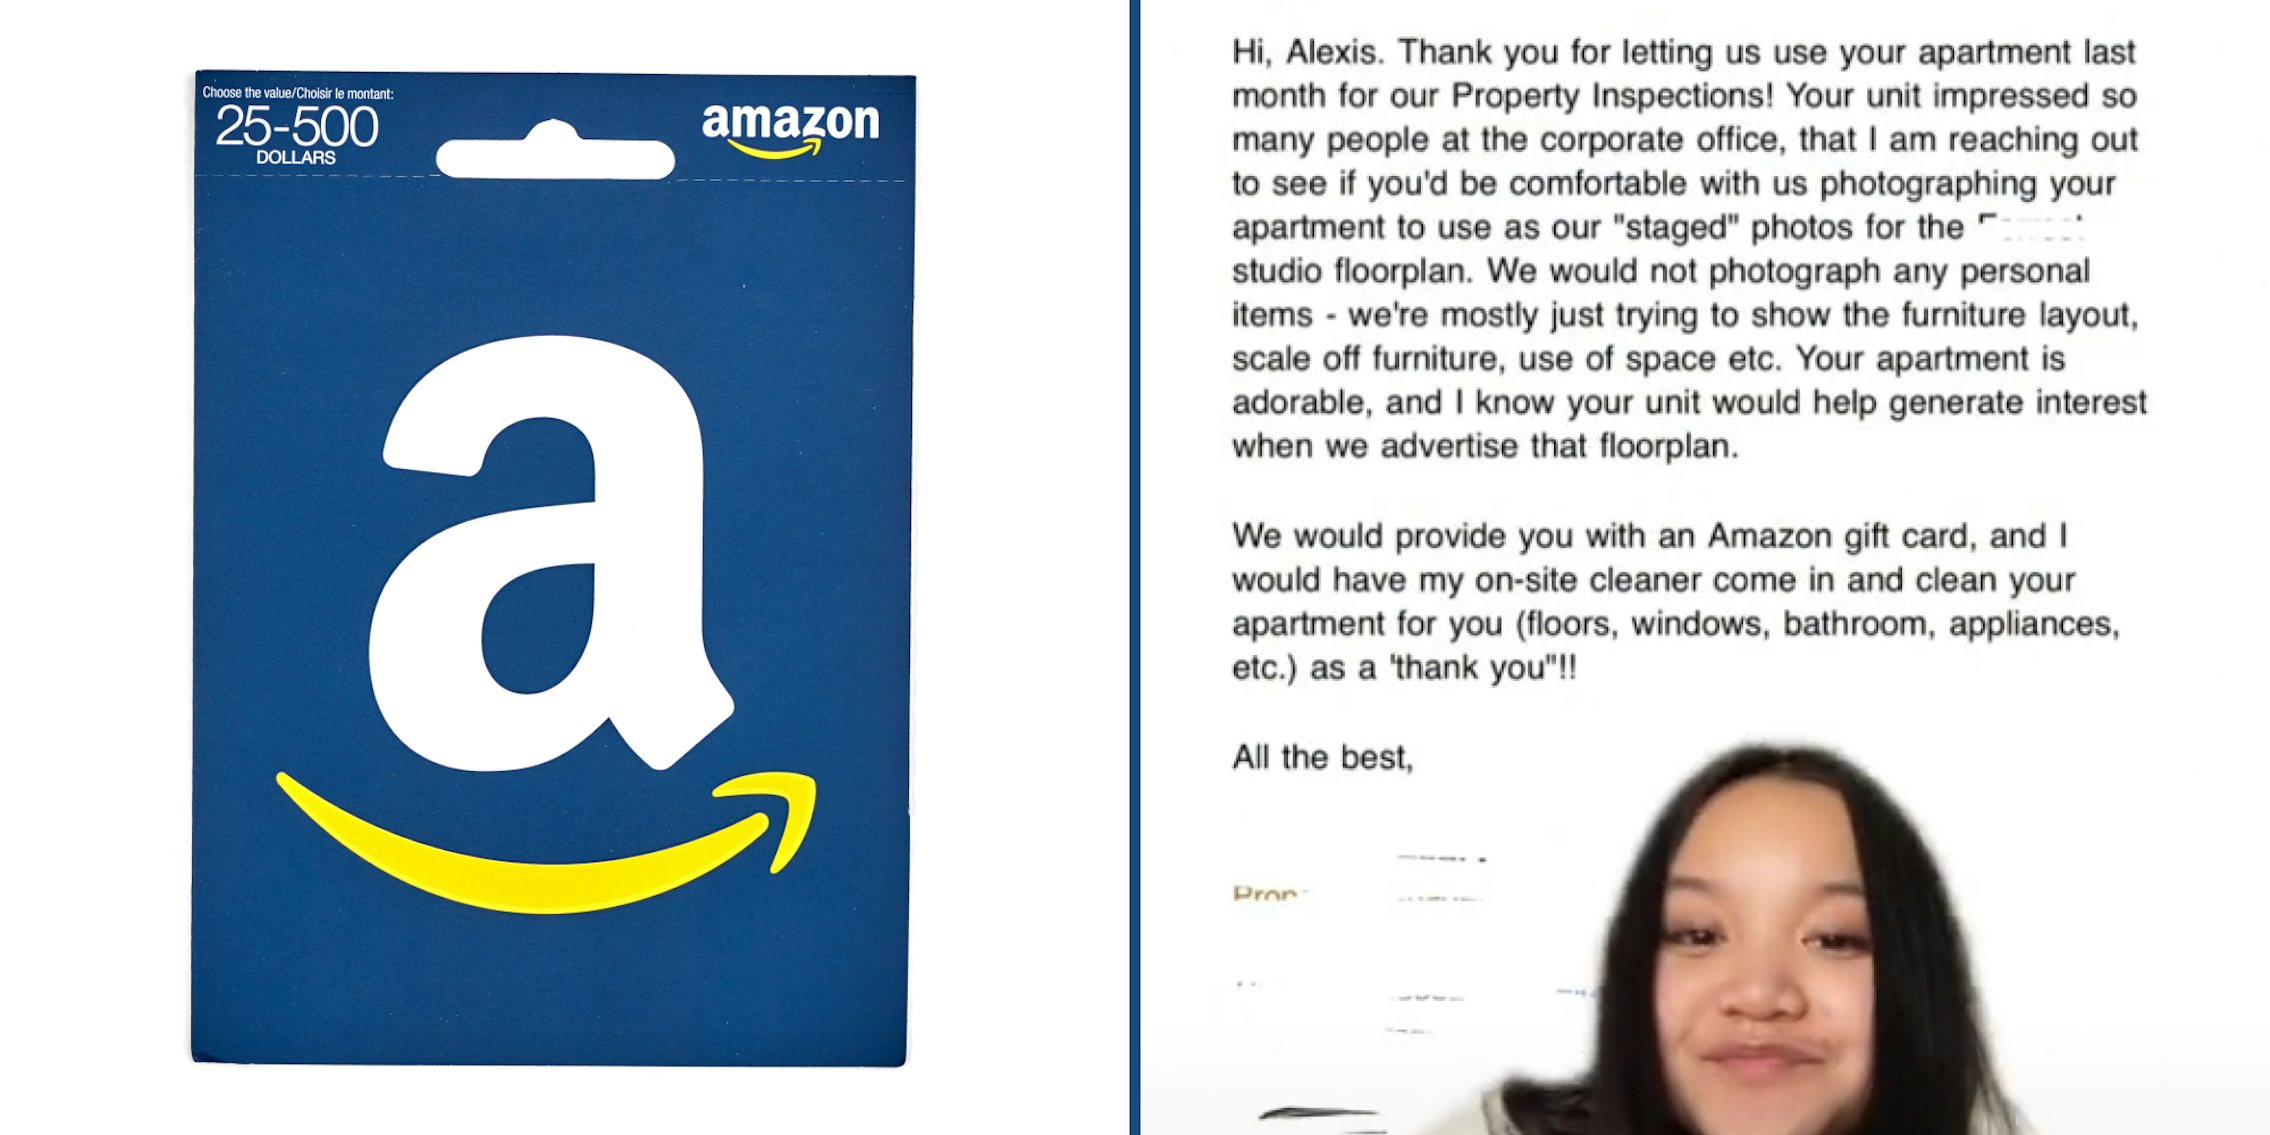 amazon giftcard (l) Woman greenscreen tiktok video with text ' Hi, Alexis. Thank you for letting us use your apartment last month for our property inspections! Your unit impressed so many people at the corporate office, that I am reaching out to see if you'd be comfortable with us photographing your apartment to use as our 'staged' photos for the blank studio floorplan. We would not photograph any personal items- we're mostly just trying to show the furniture layout, scale off furniture, use of space etc. Your apartment is adorable, and I know your unit would help generate interest when we advertise the floorplan. We would provide you with an Amazon gift card, and I would have my on-site cleaner coe clean your apartment for you' (r)